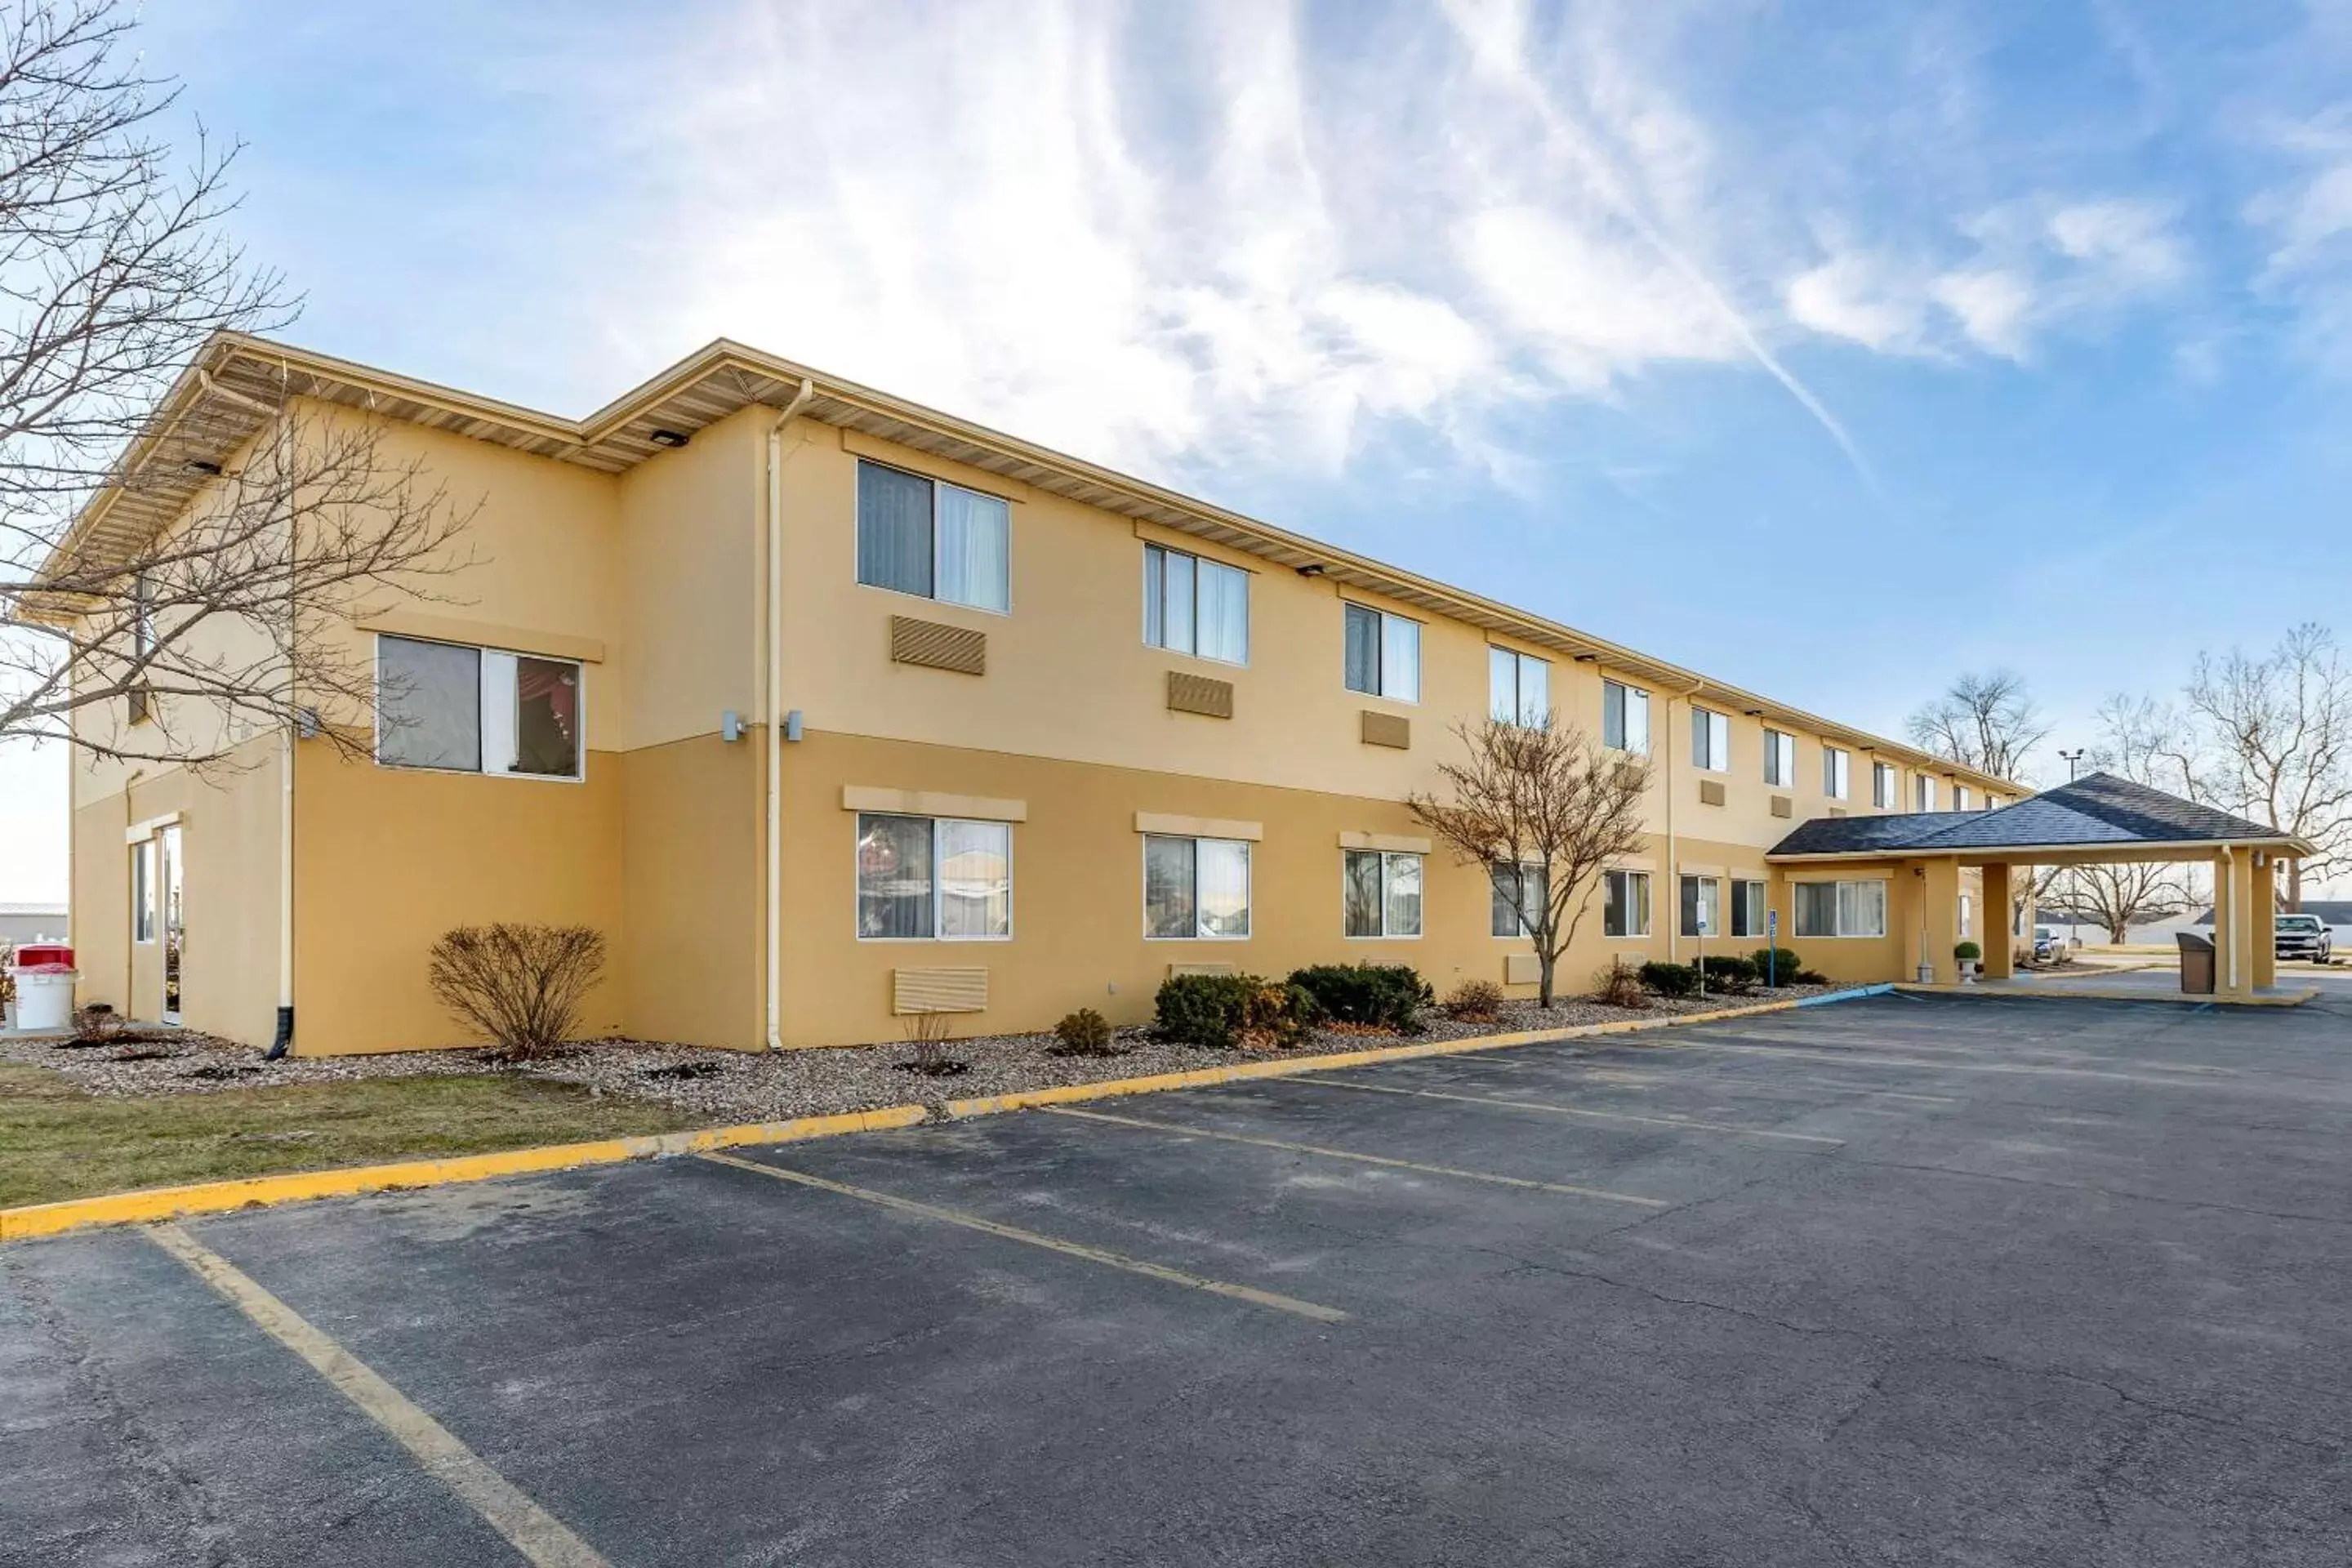 Property building in Quality Inn Kirksville